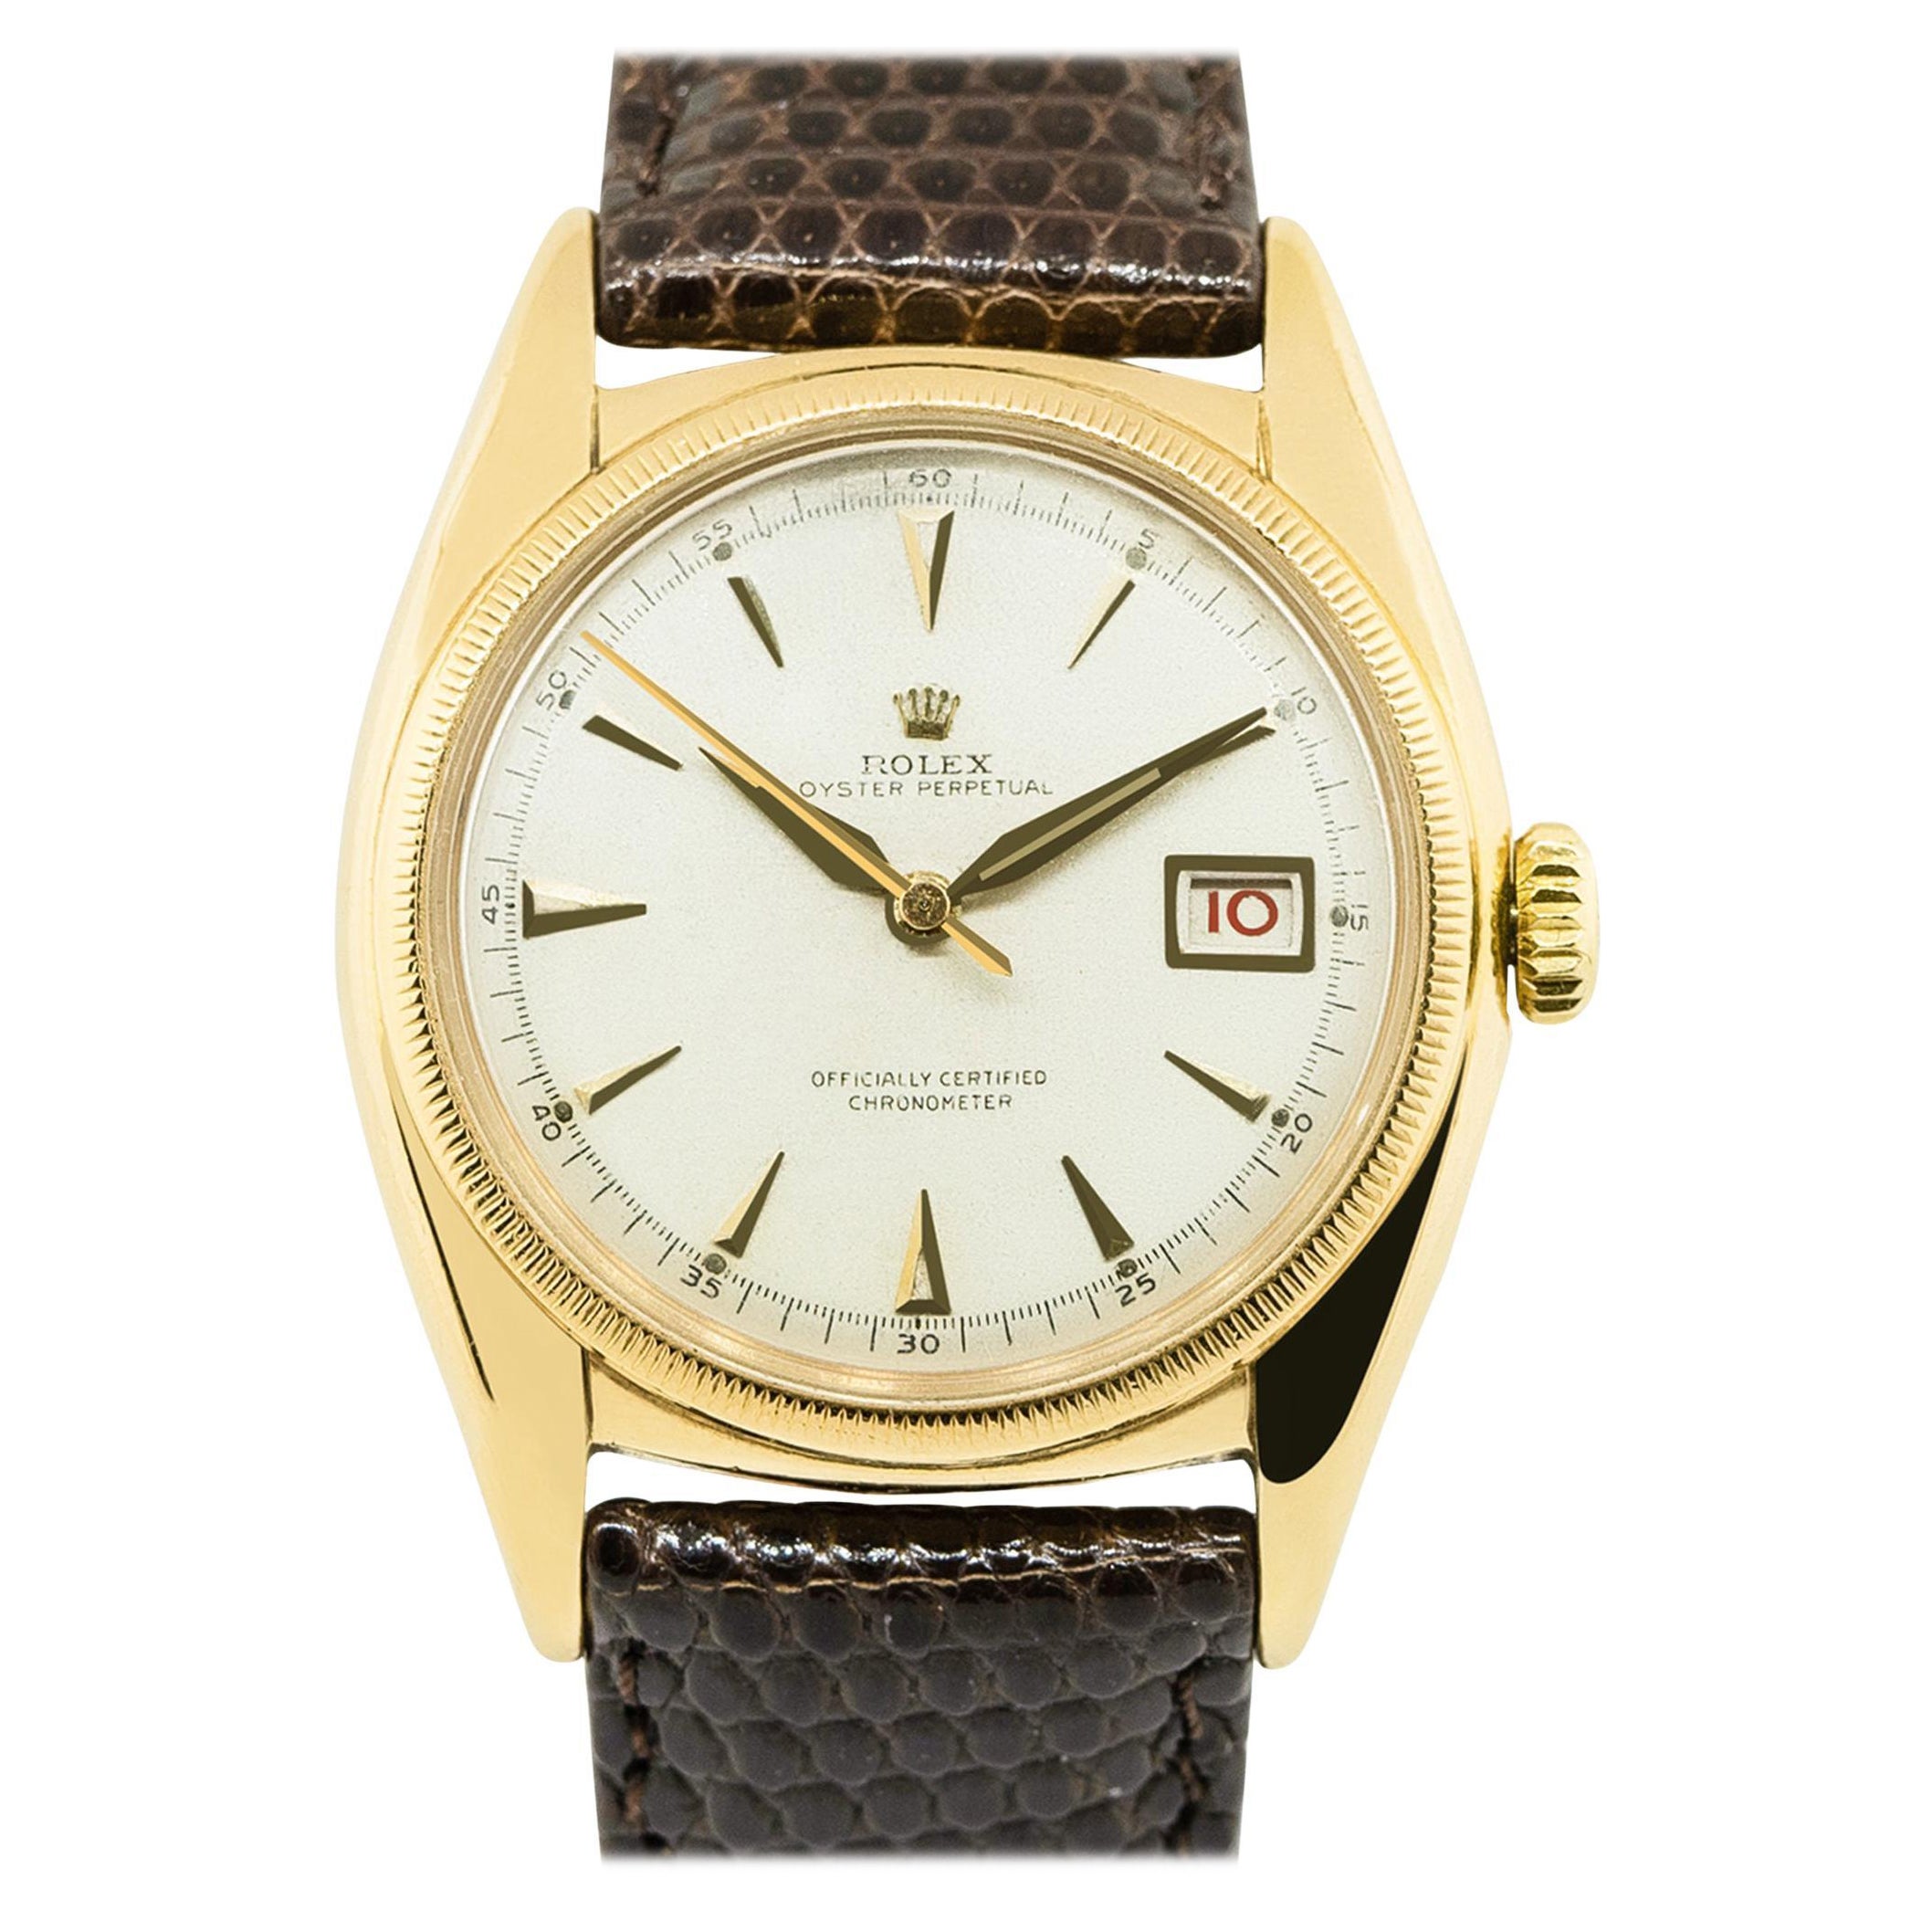 Rolex 6075 Bubble Back 18k Yellow Gold Vintage Watch in Stock